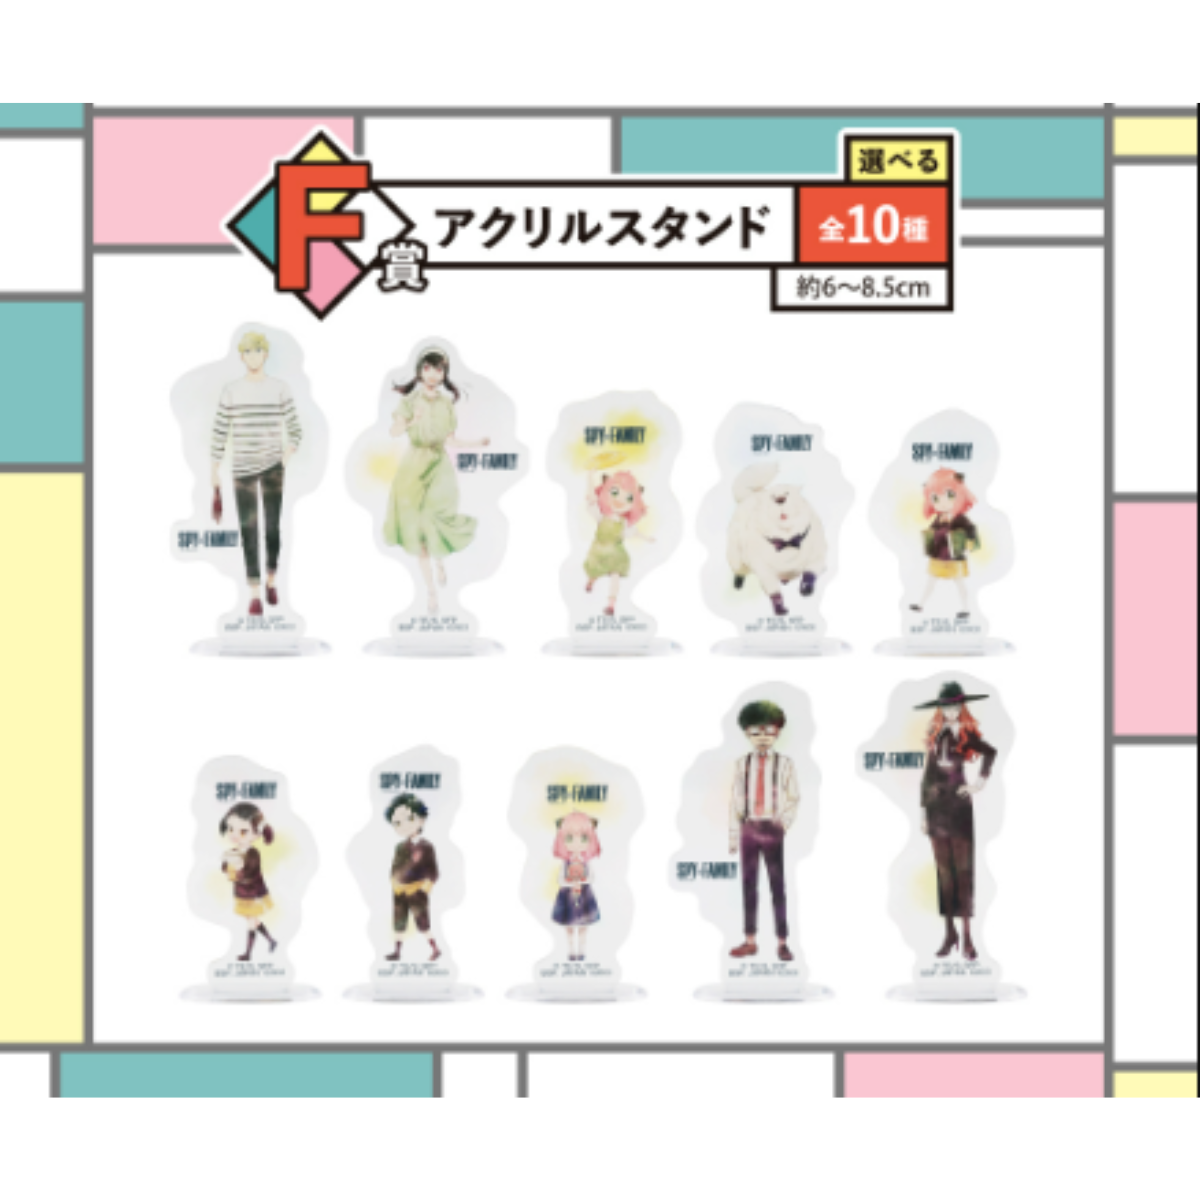 Ichiban Kuji Spy x Family ~ You Made My Day ~-Bandai-Ace Cards &amp; Collectibles